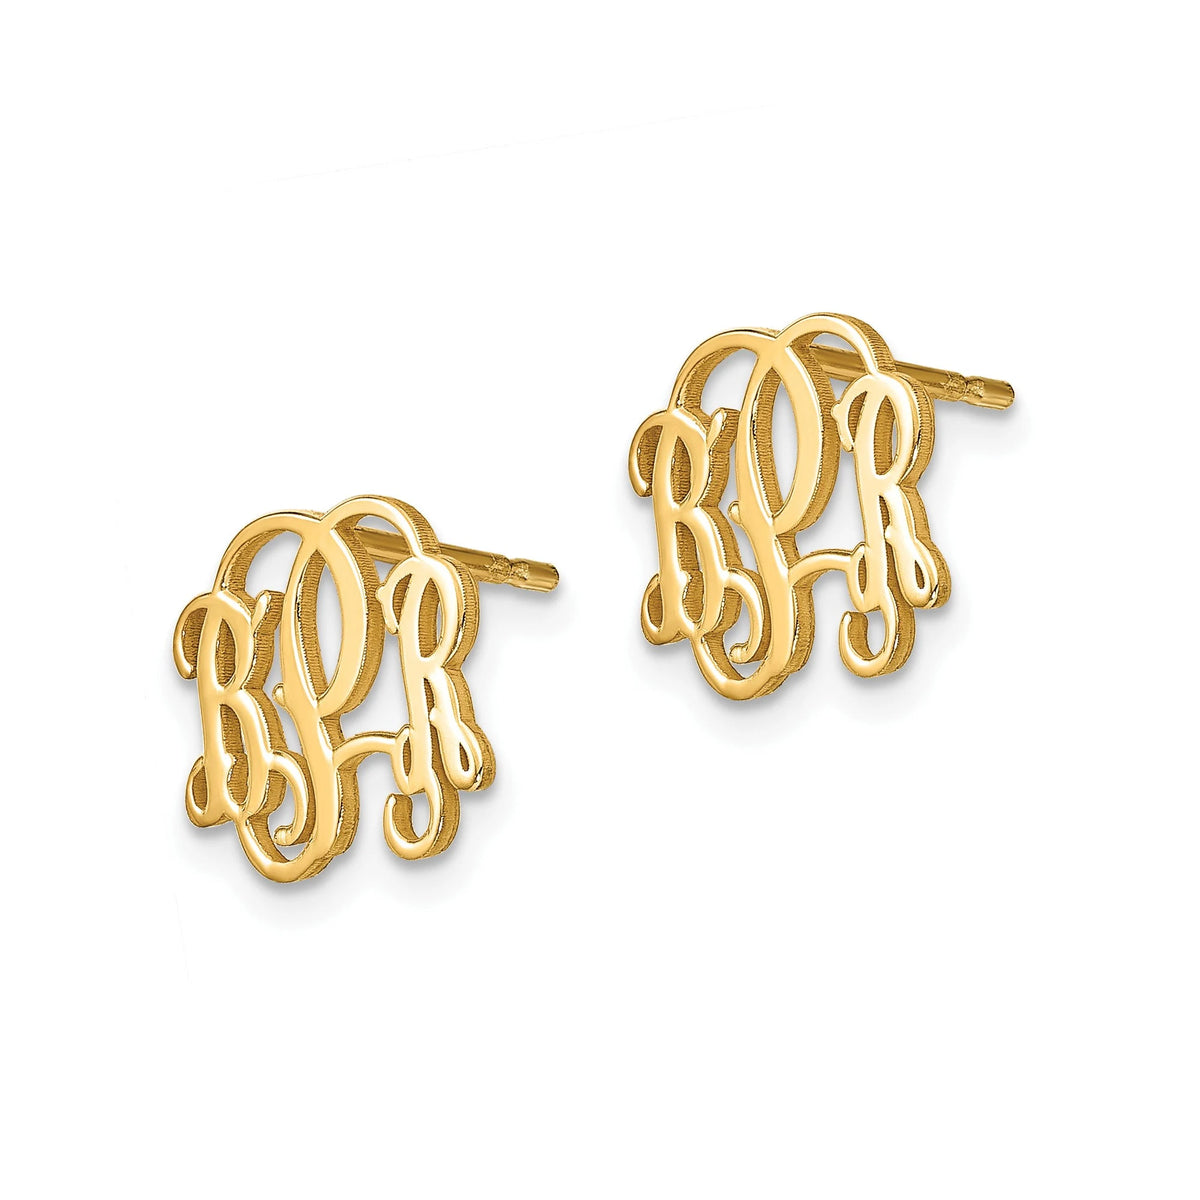 Personalized Monogram Stud Earrings Available in Sterling Silver Gold Plated Silver & 14k Gold - Gift Box Included Made in USA